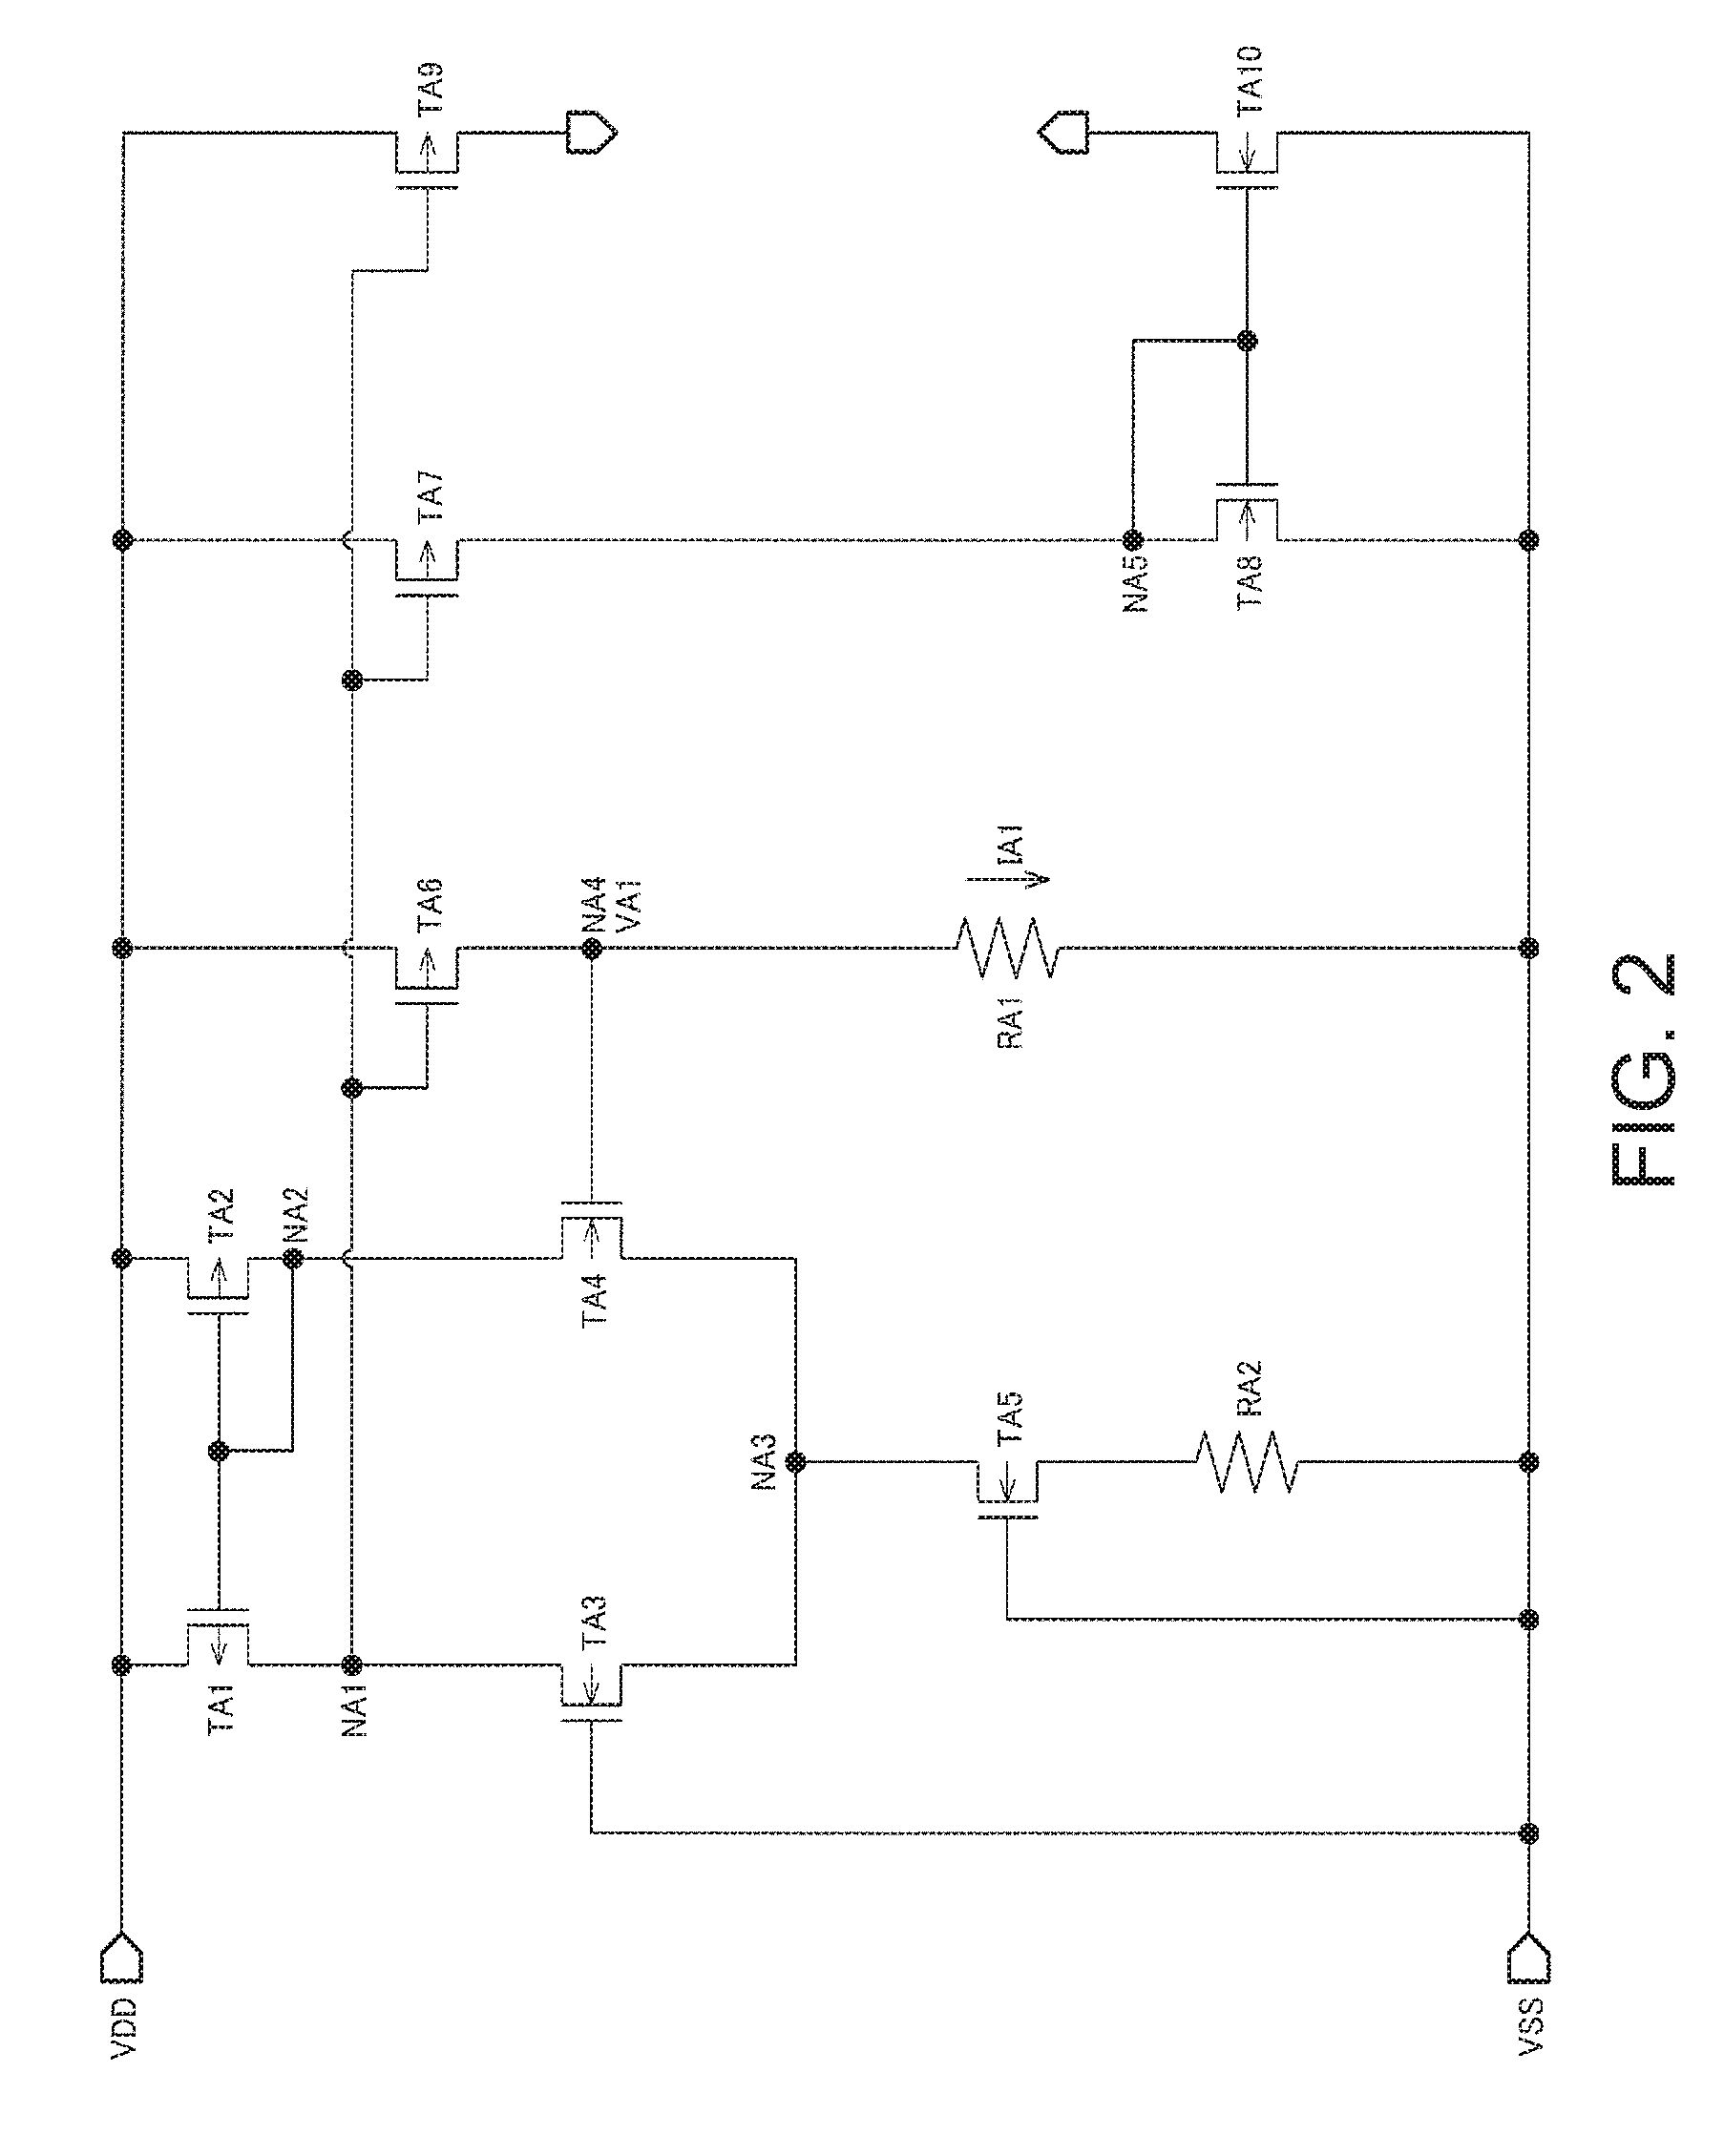 Circuit apparatus, electronic apparatus, and moving object